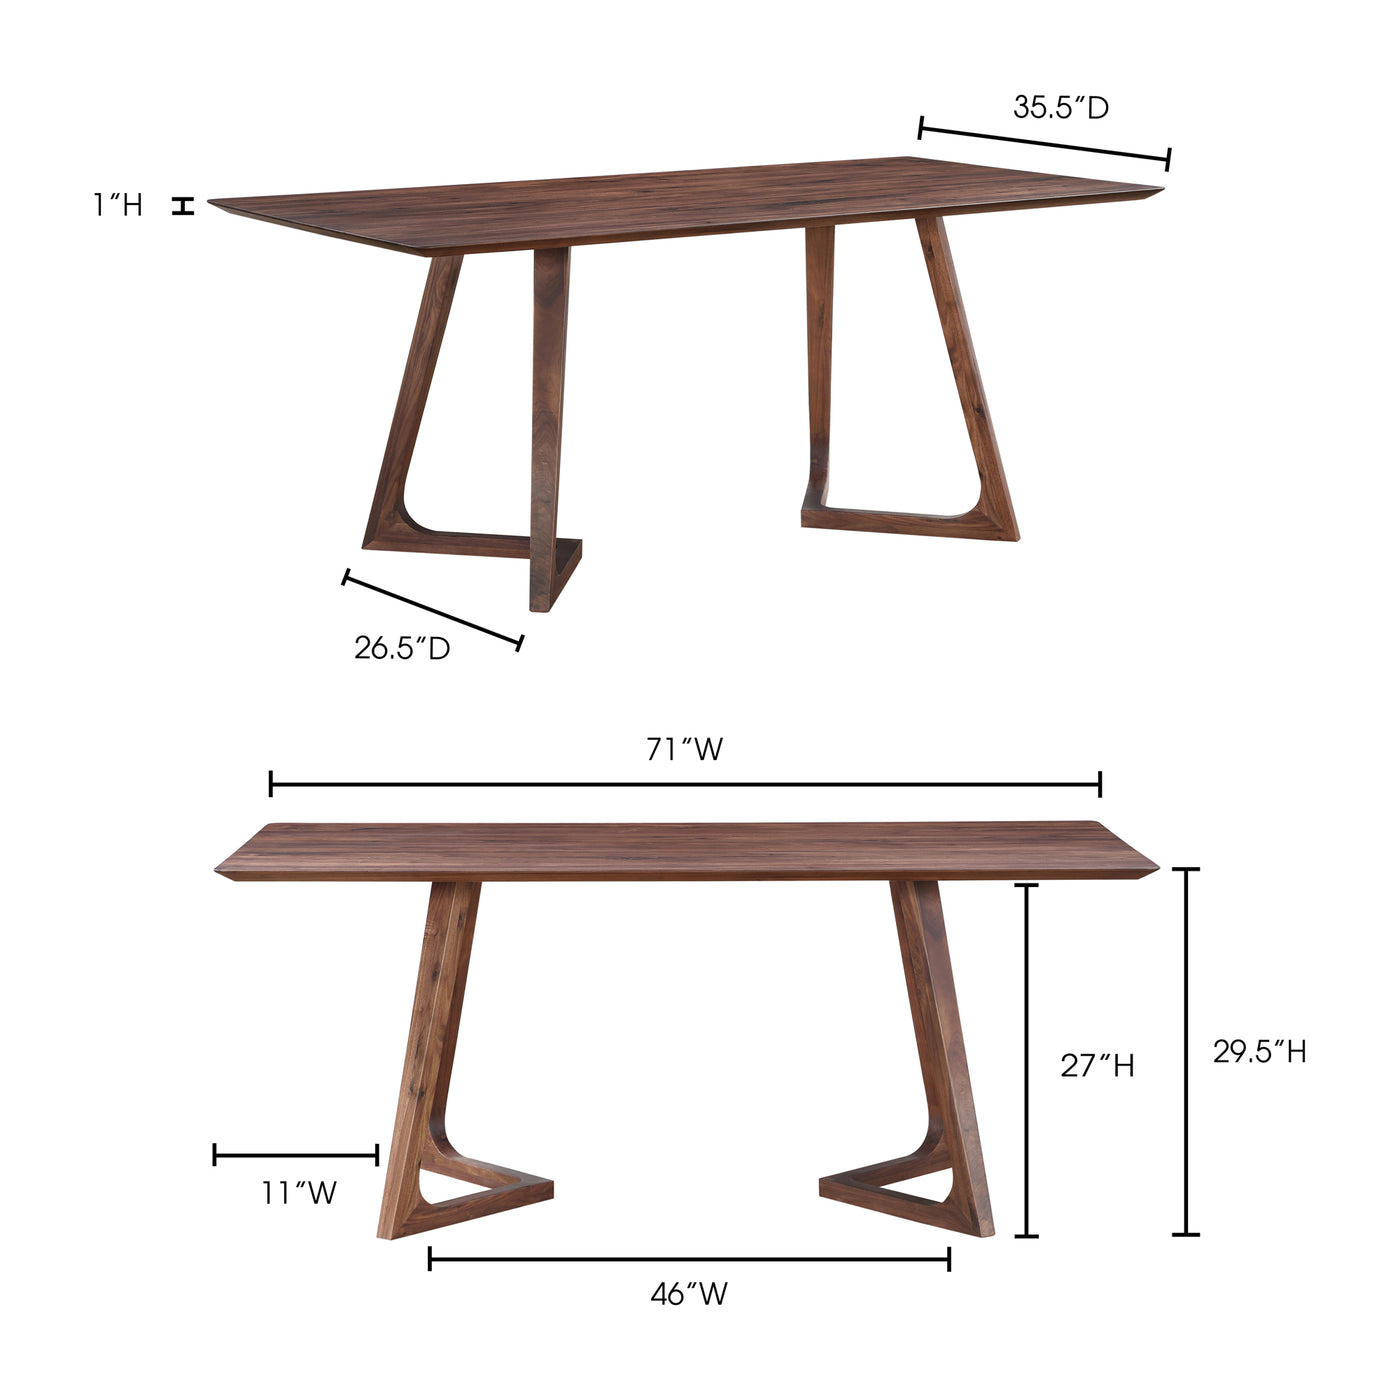 Made from solid American walnut, the Godenza Dining Table's mid-century modern design gives your dining room a subtle soph...